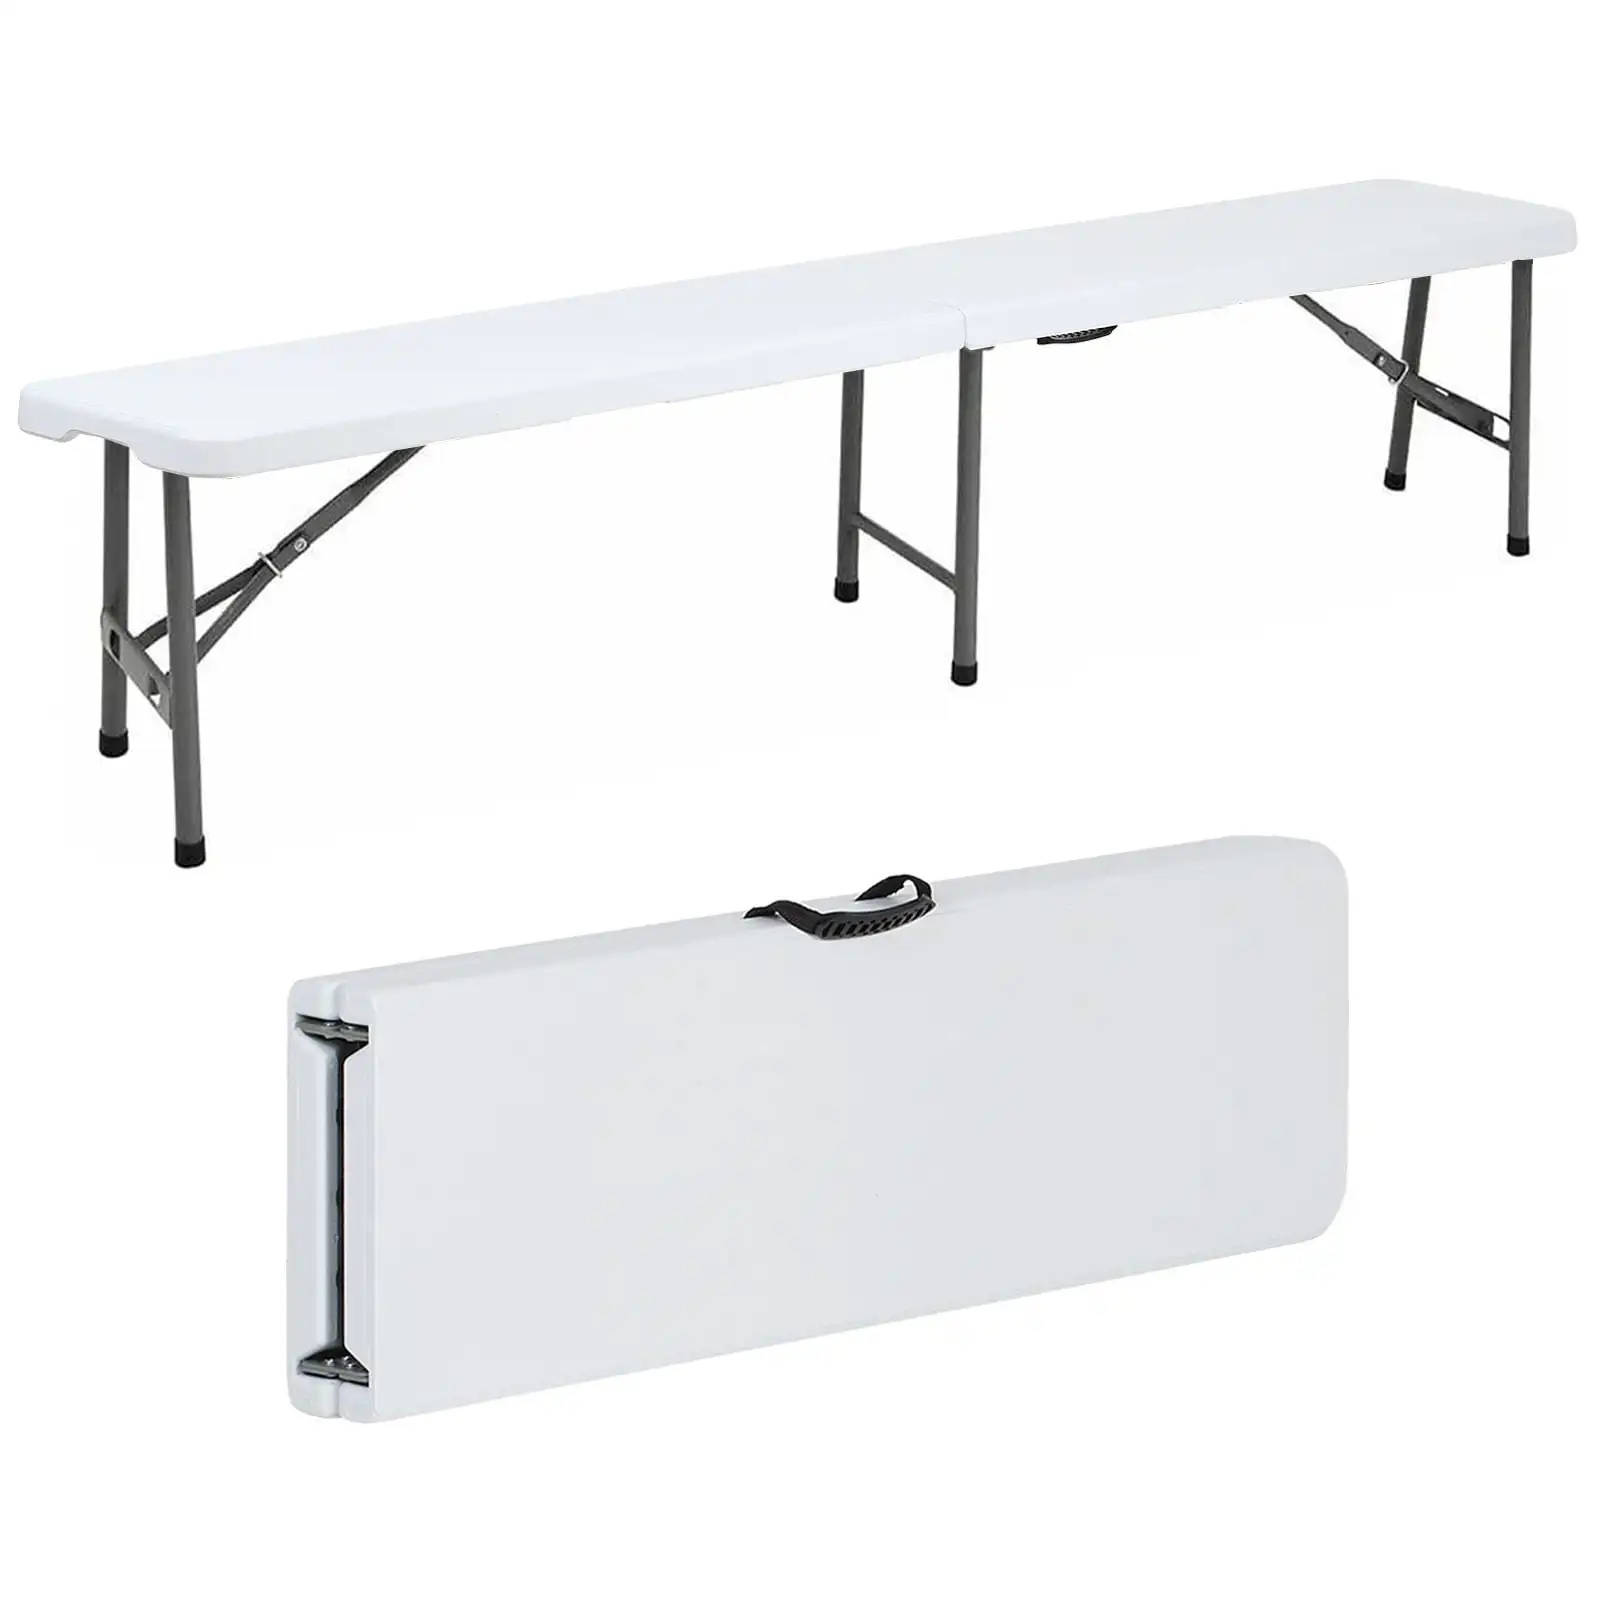 

SUGIFT 6 ft Plastic Folding Bench Portable Indoor Outdoor Bench, White